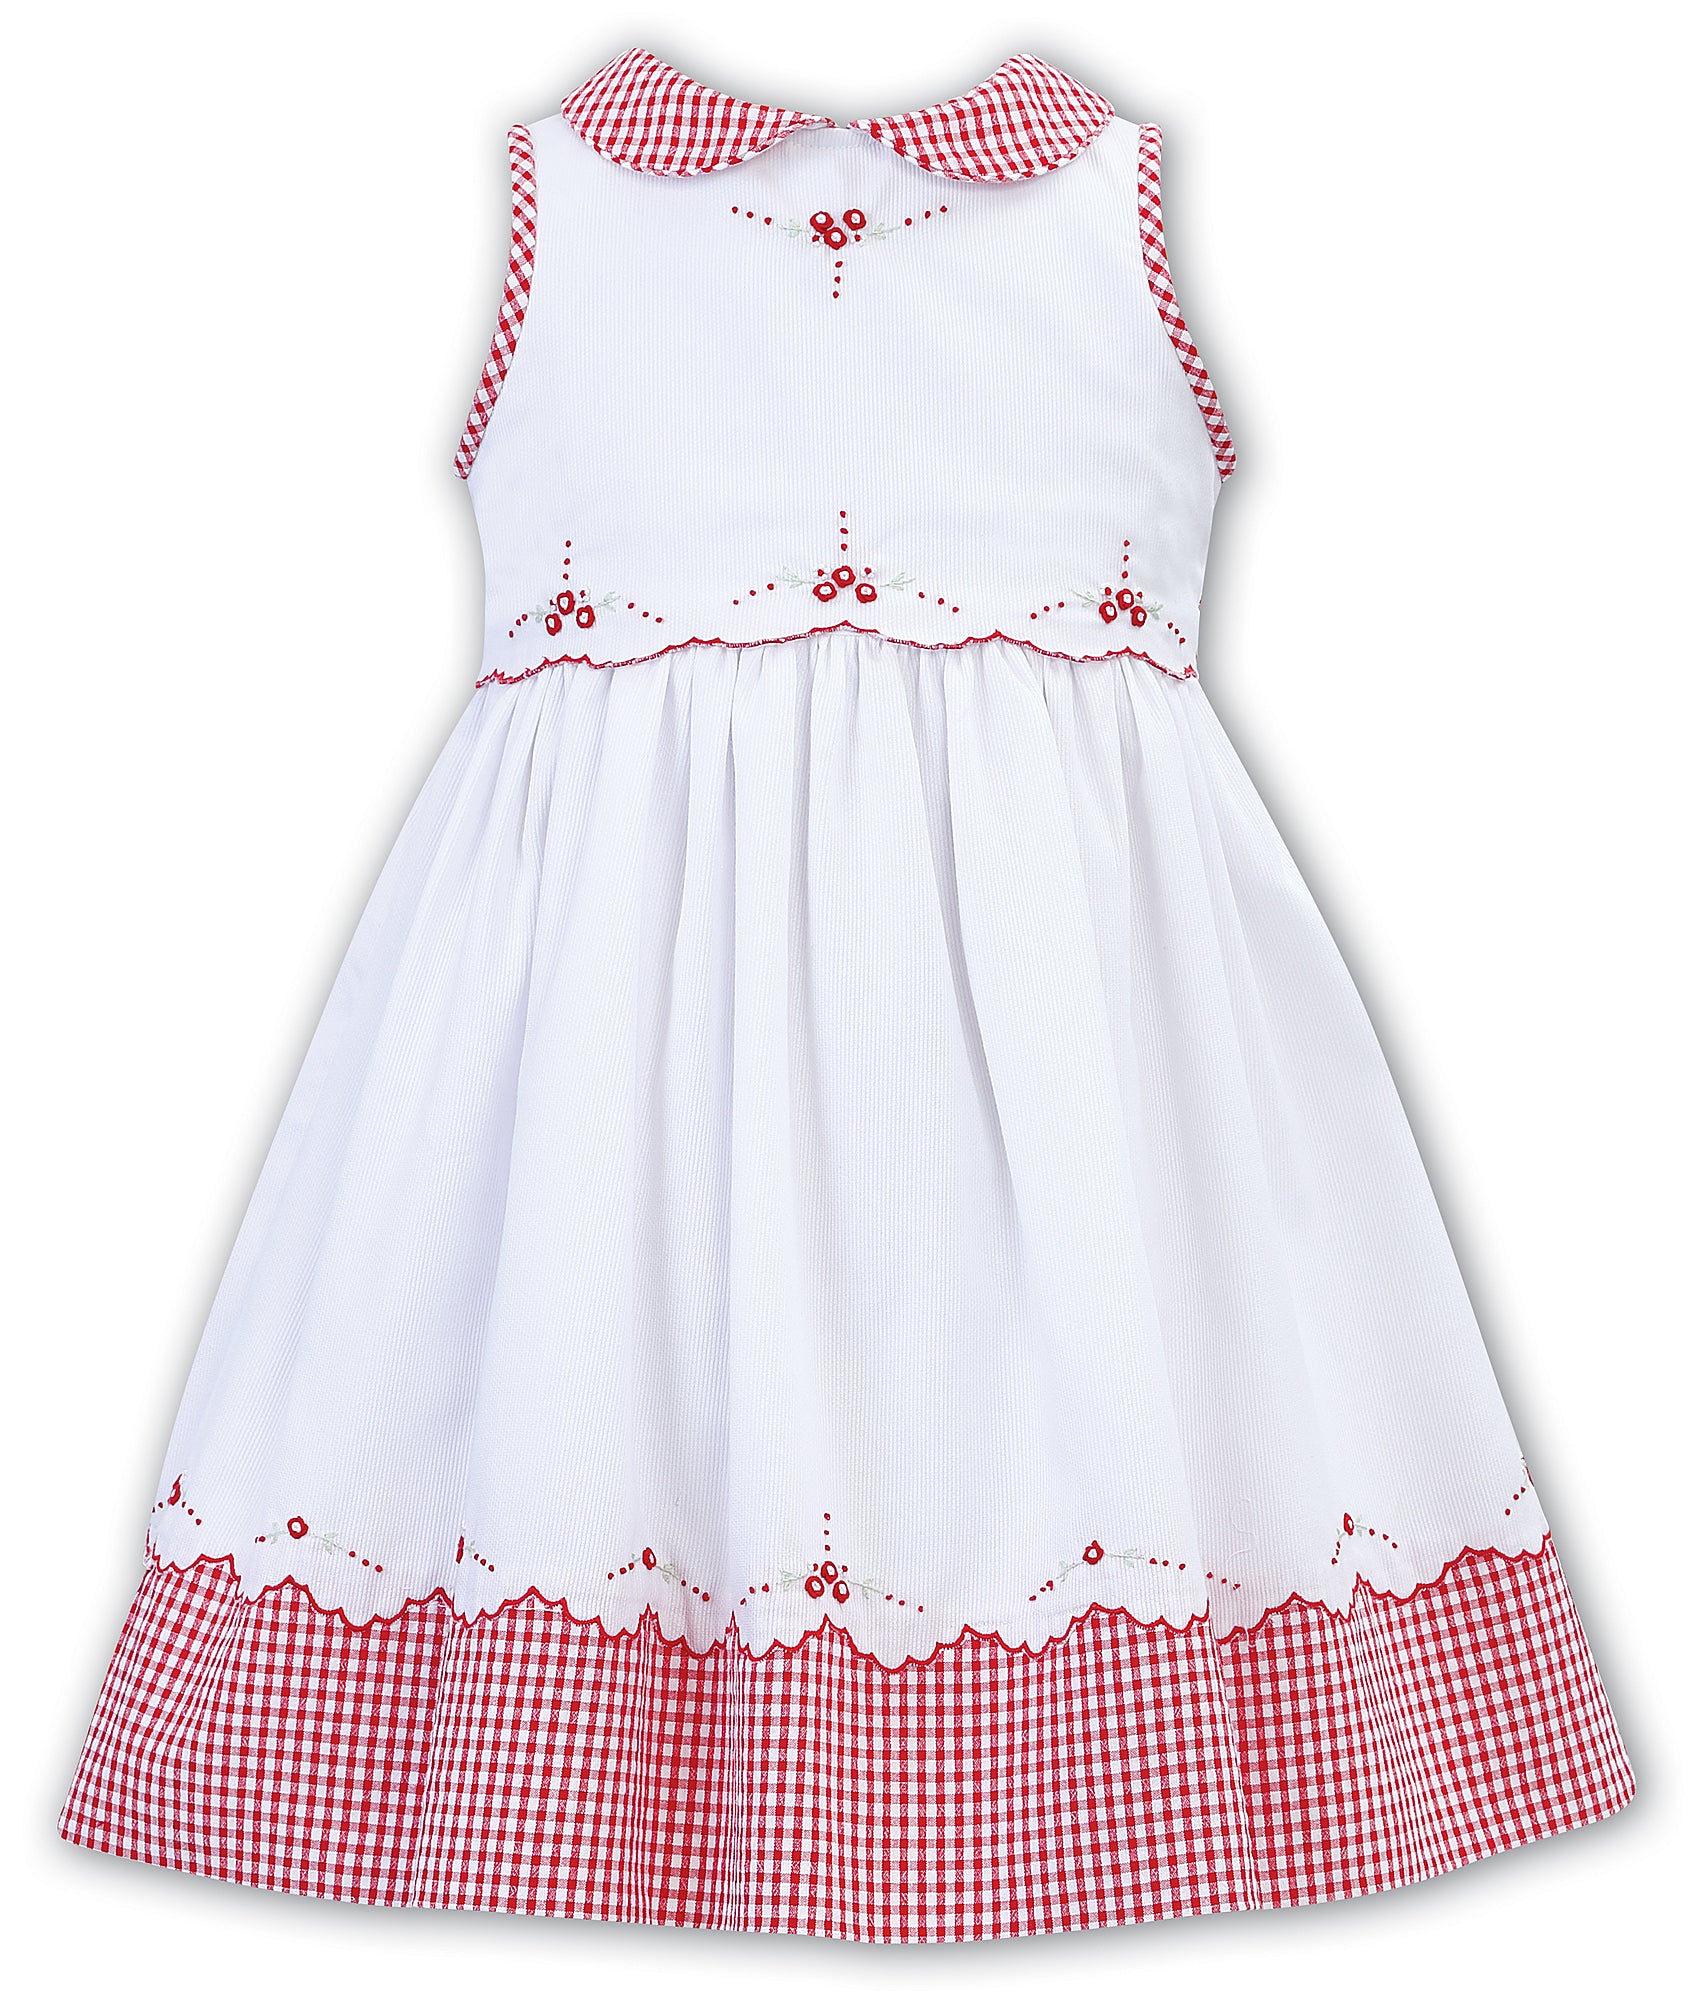 Sarah louise of england red gingham dress with floral hand embroidery